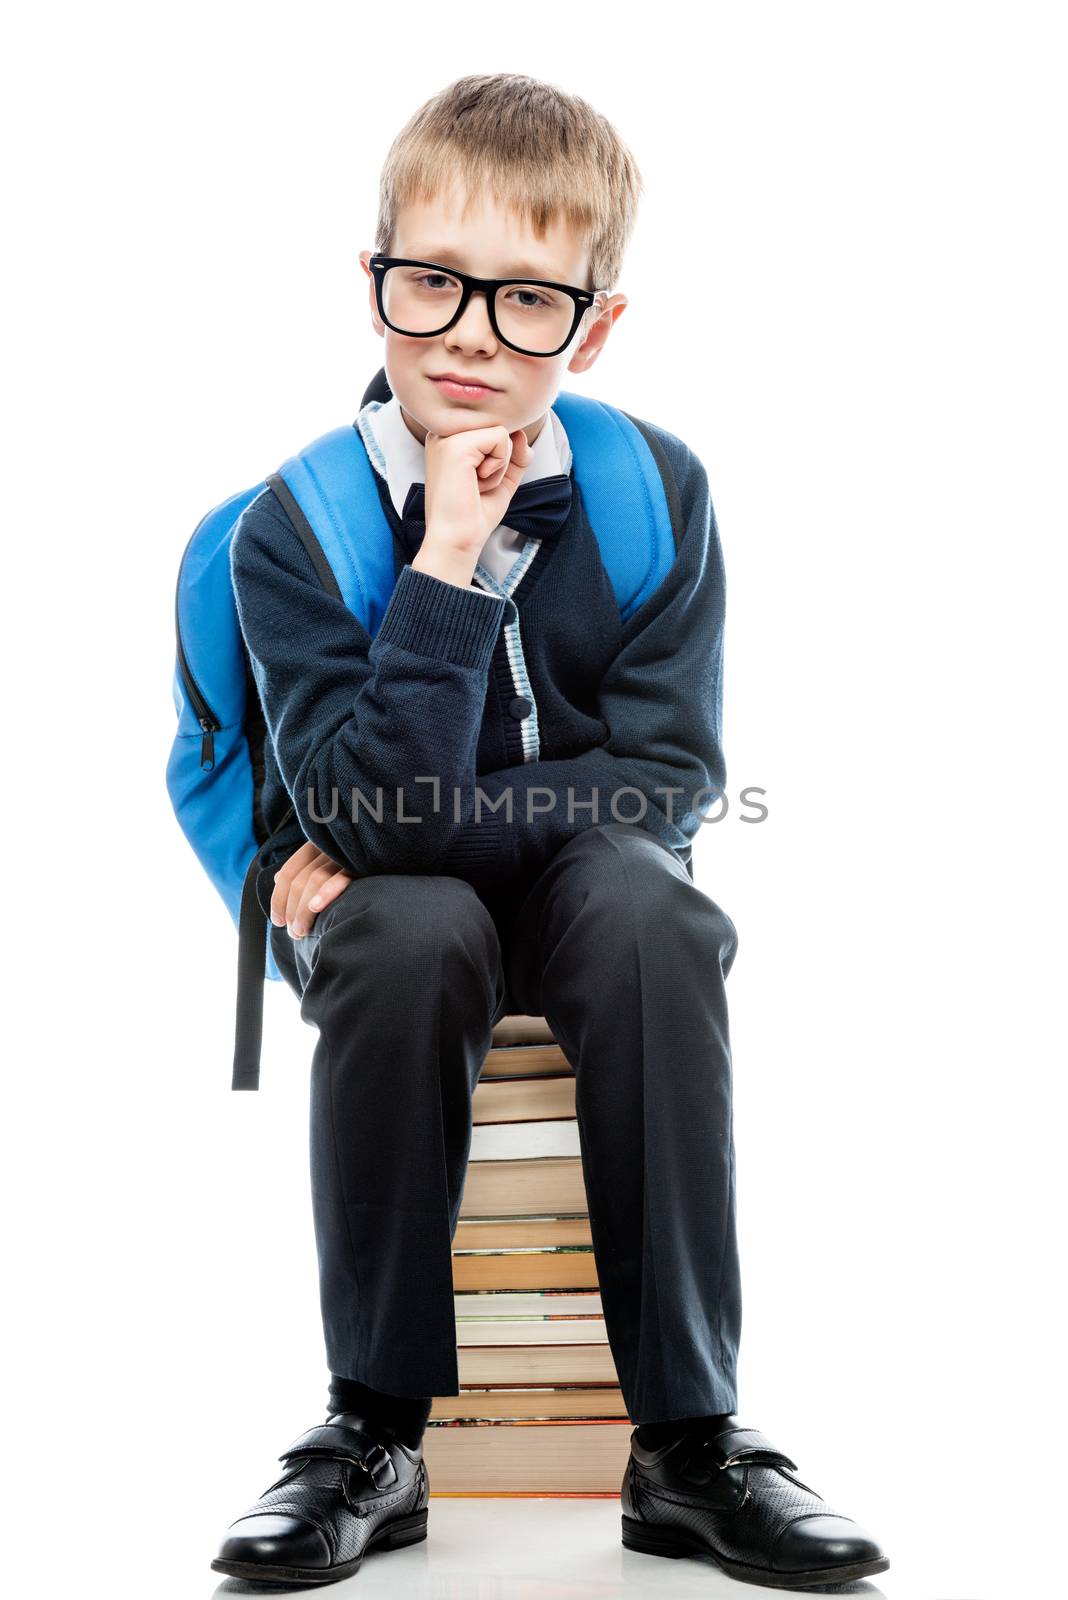 portrait of a schoolboy with glasses sitting on a pile of books by kosmsos111